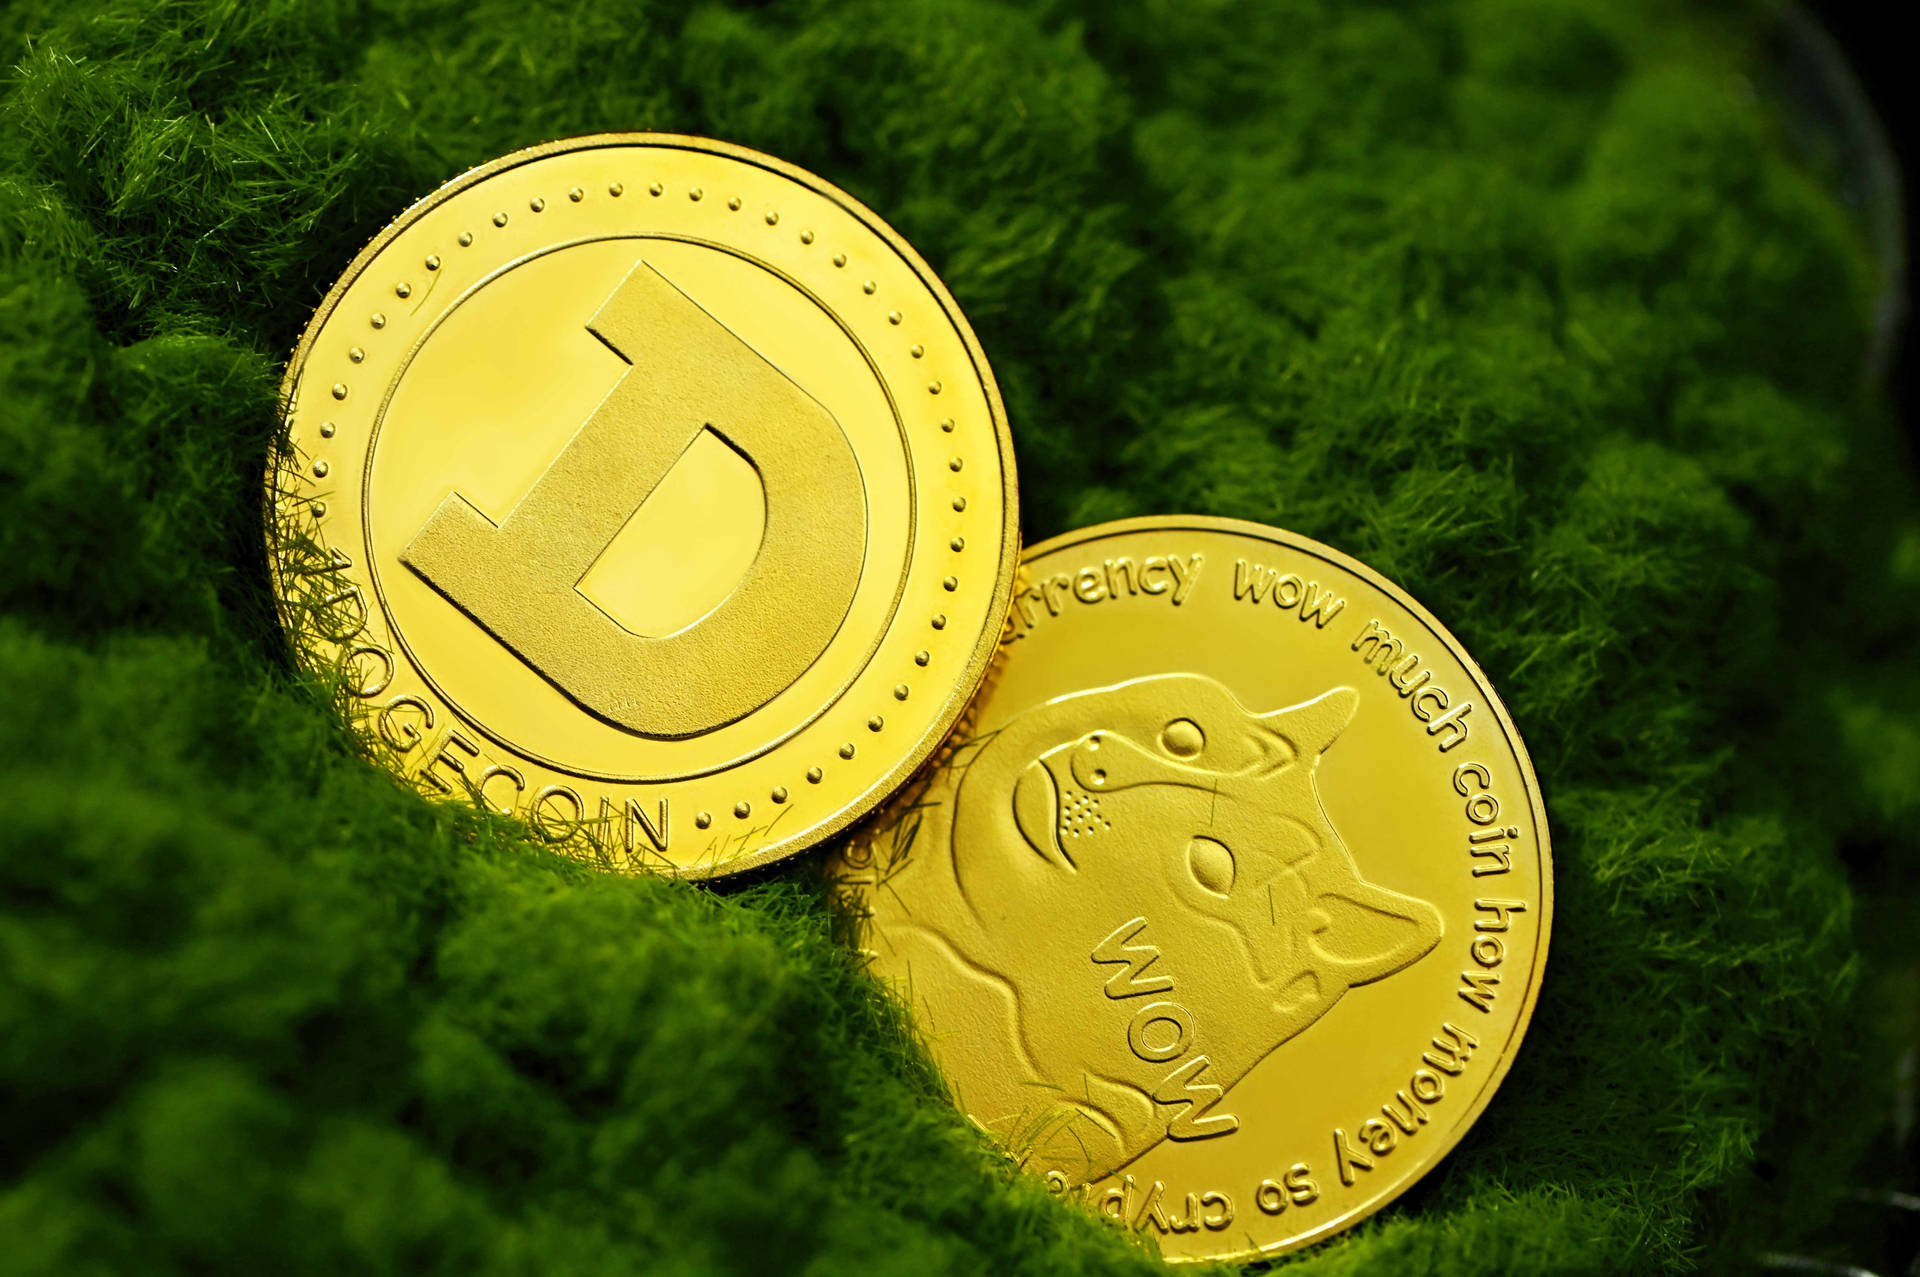 Dogecoin On Moss Background